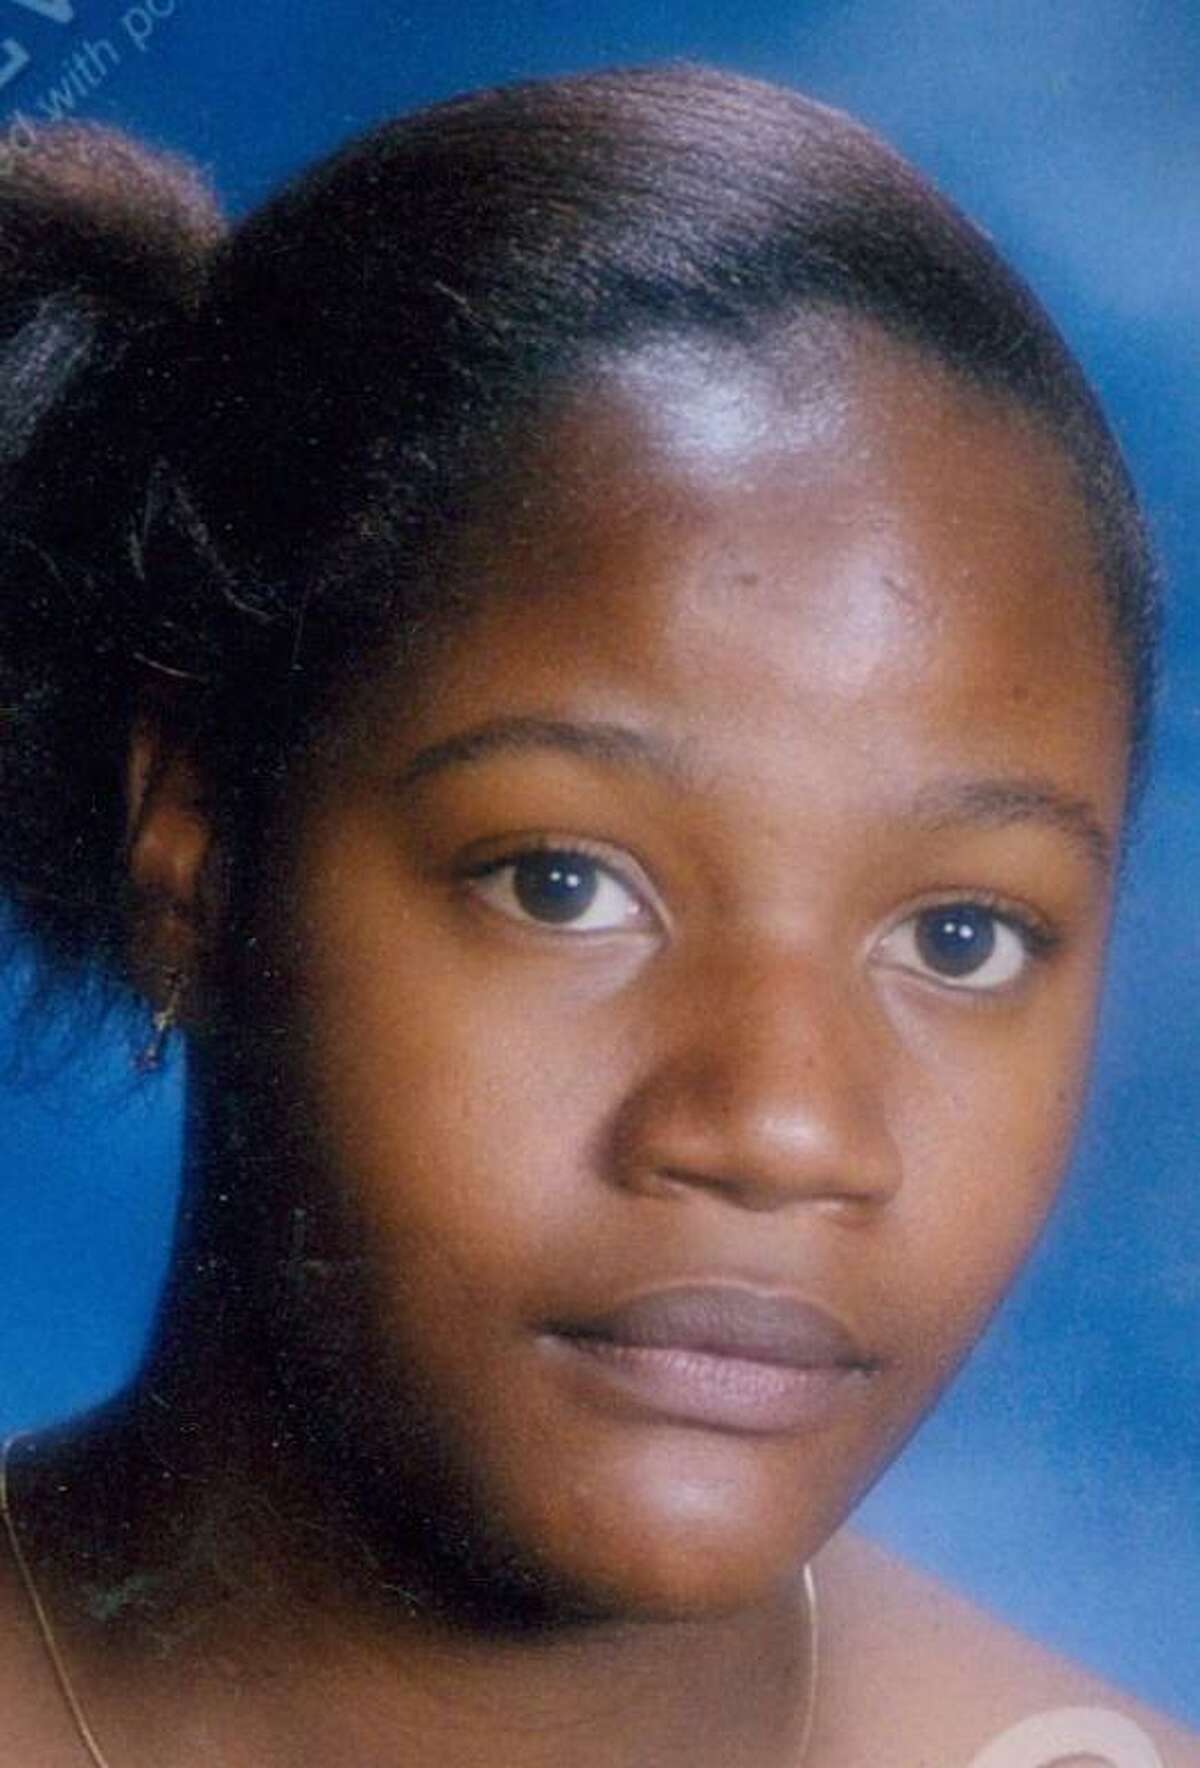 Tiana Black died of smoke inhalation with her three children, Ny-shon, Tyaisja, Nyaisja Williams, in an early morning fire at PT Barnum Apartments in Bridgeport on November 13, 2009.